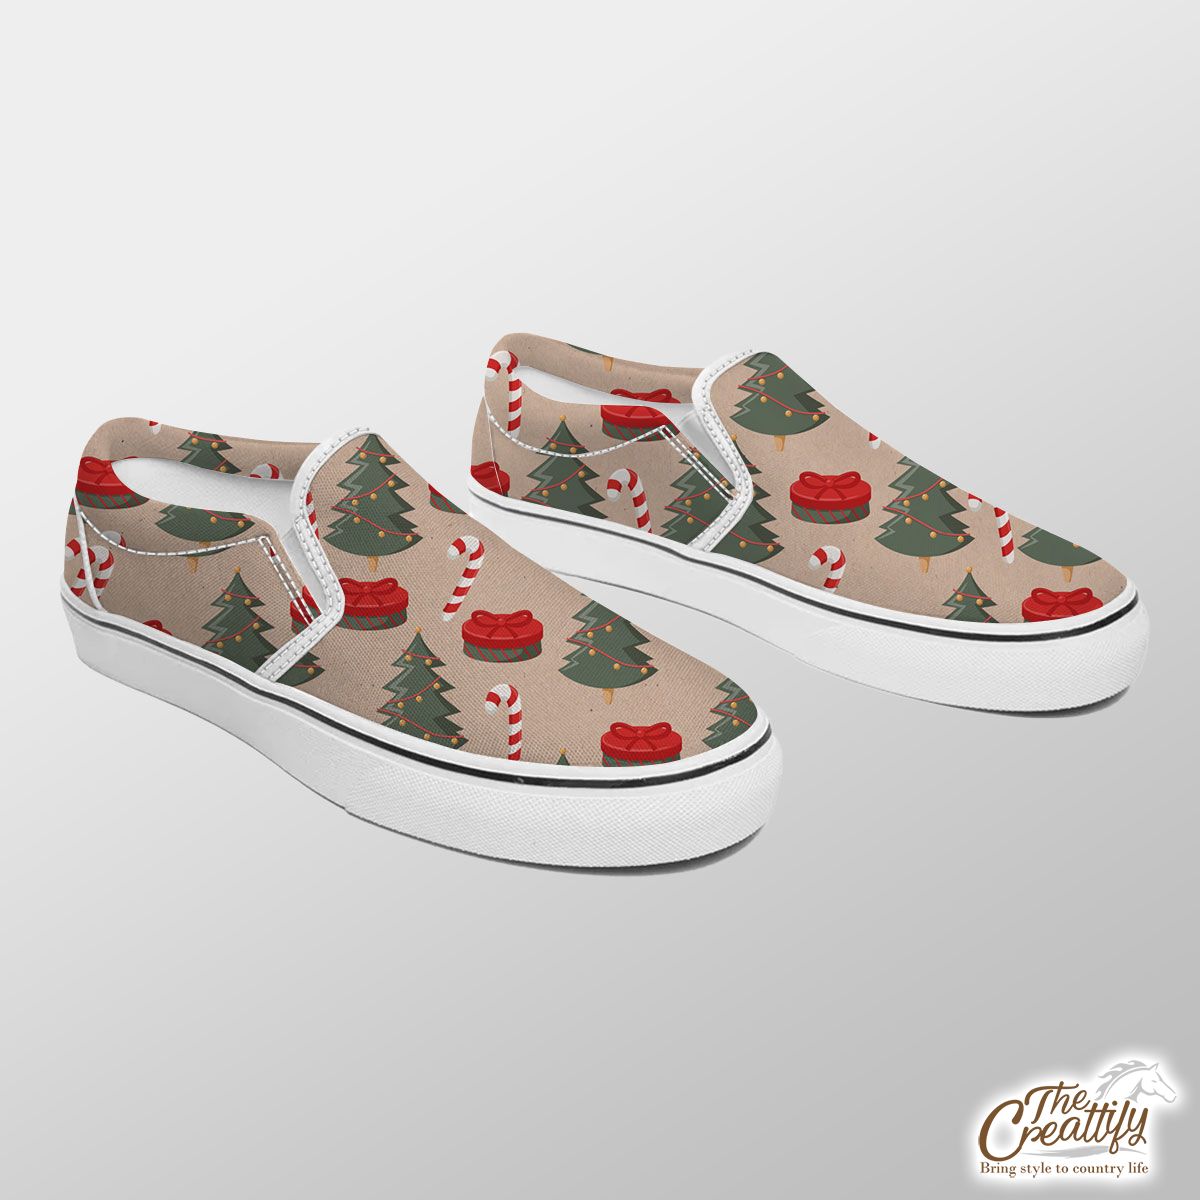 Christmas Tree, Christmas Gift, Candy Cane Slip On Sneakers